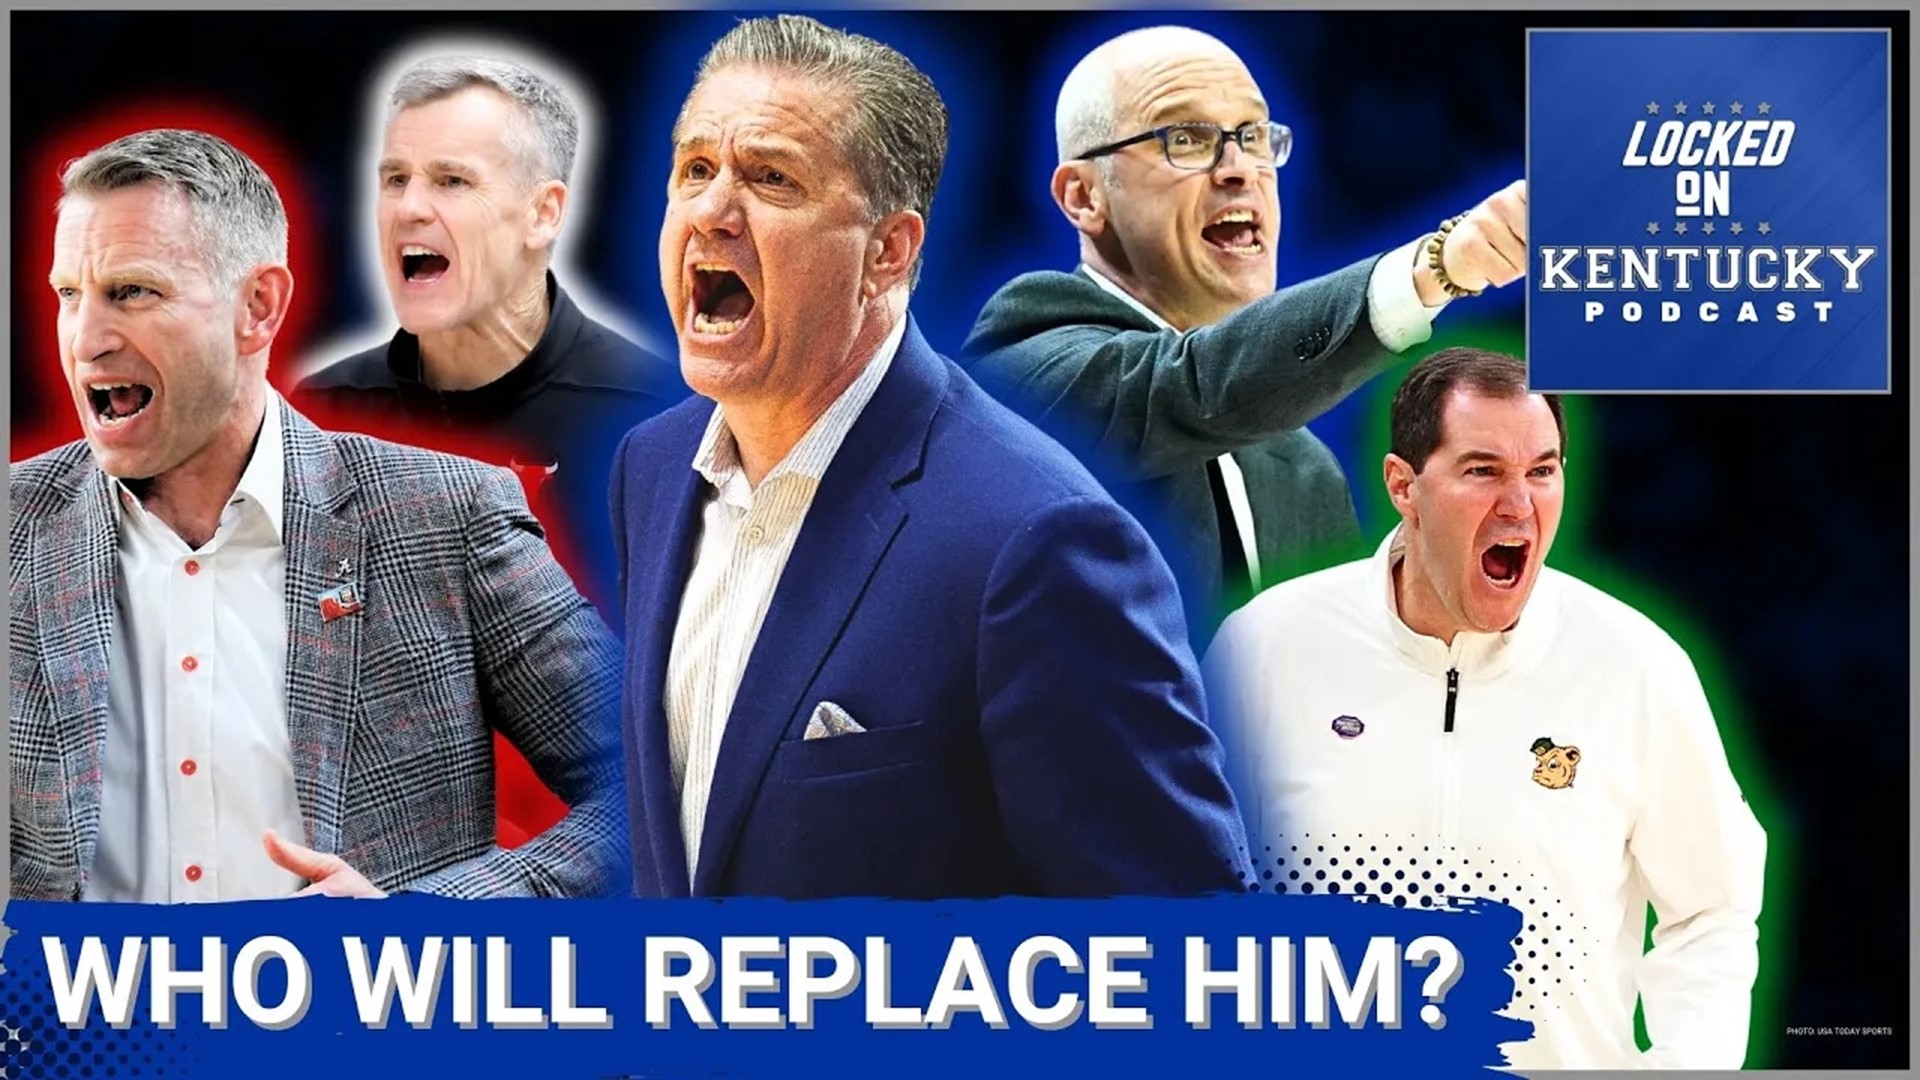 Who are the best candidates to replace John Calipari for Kentucky basketball?